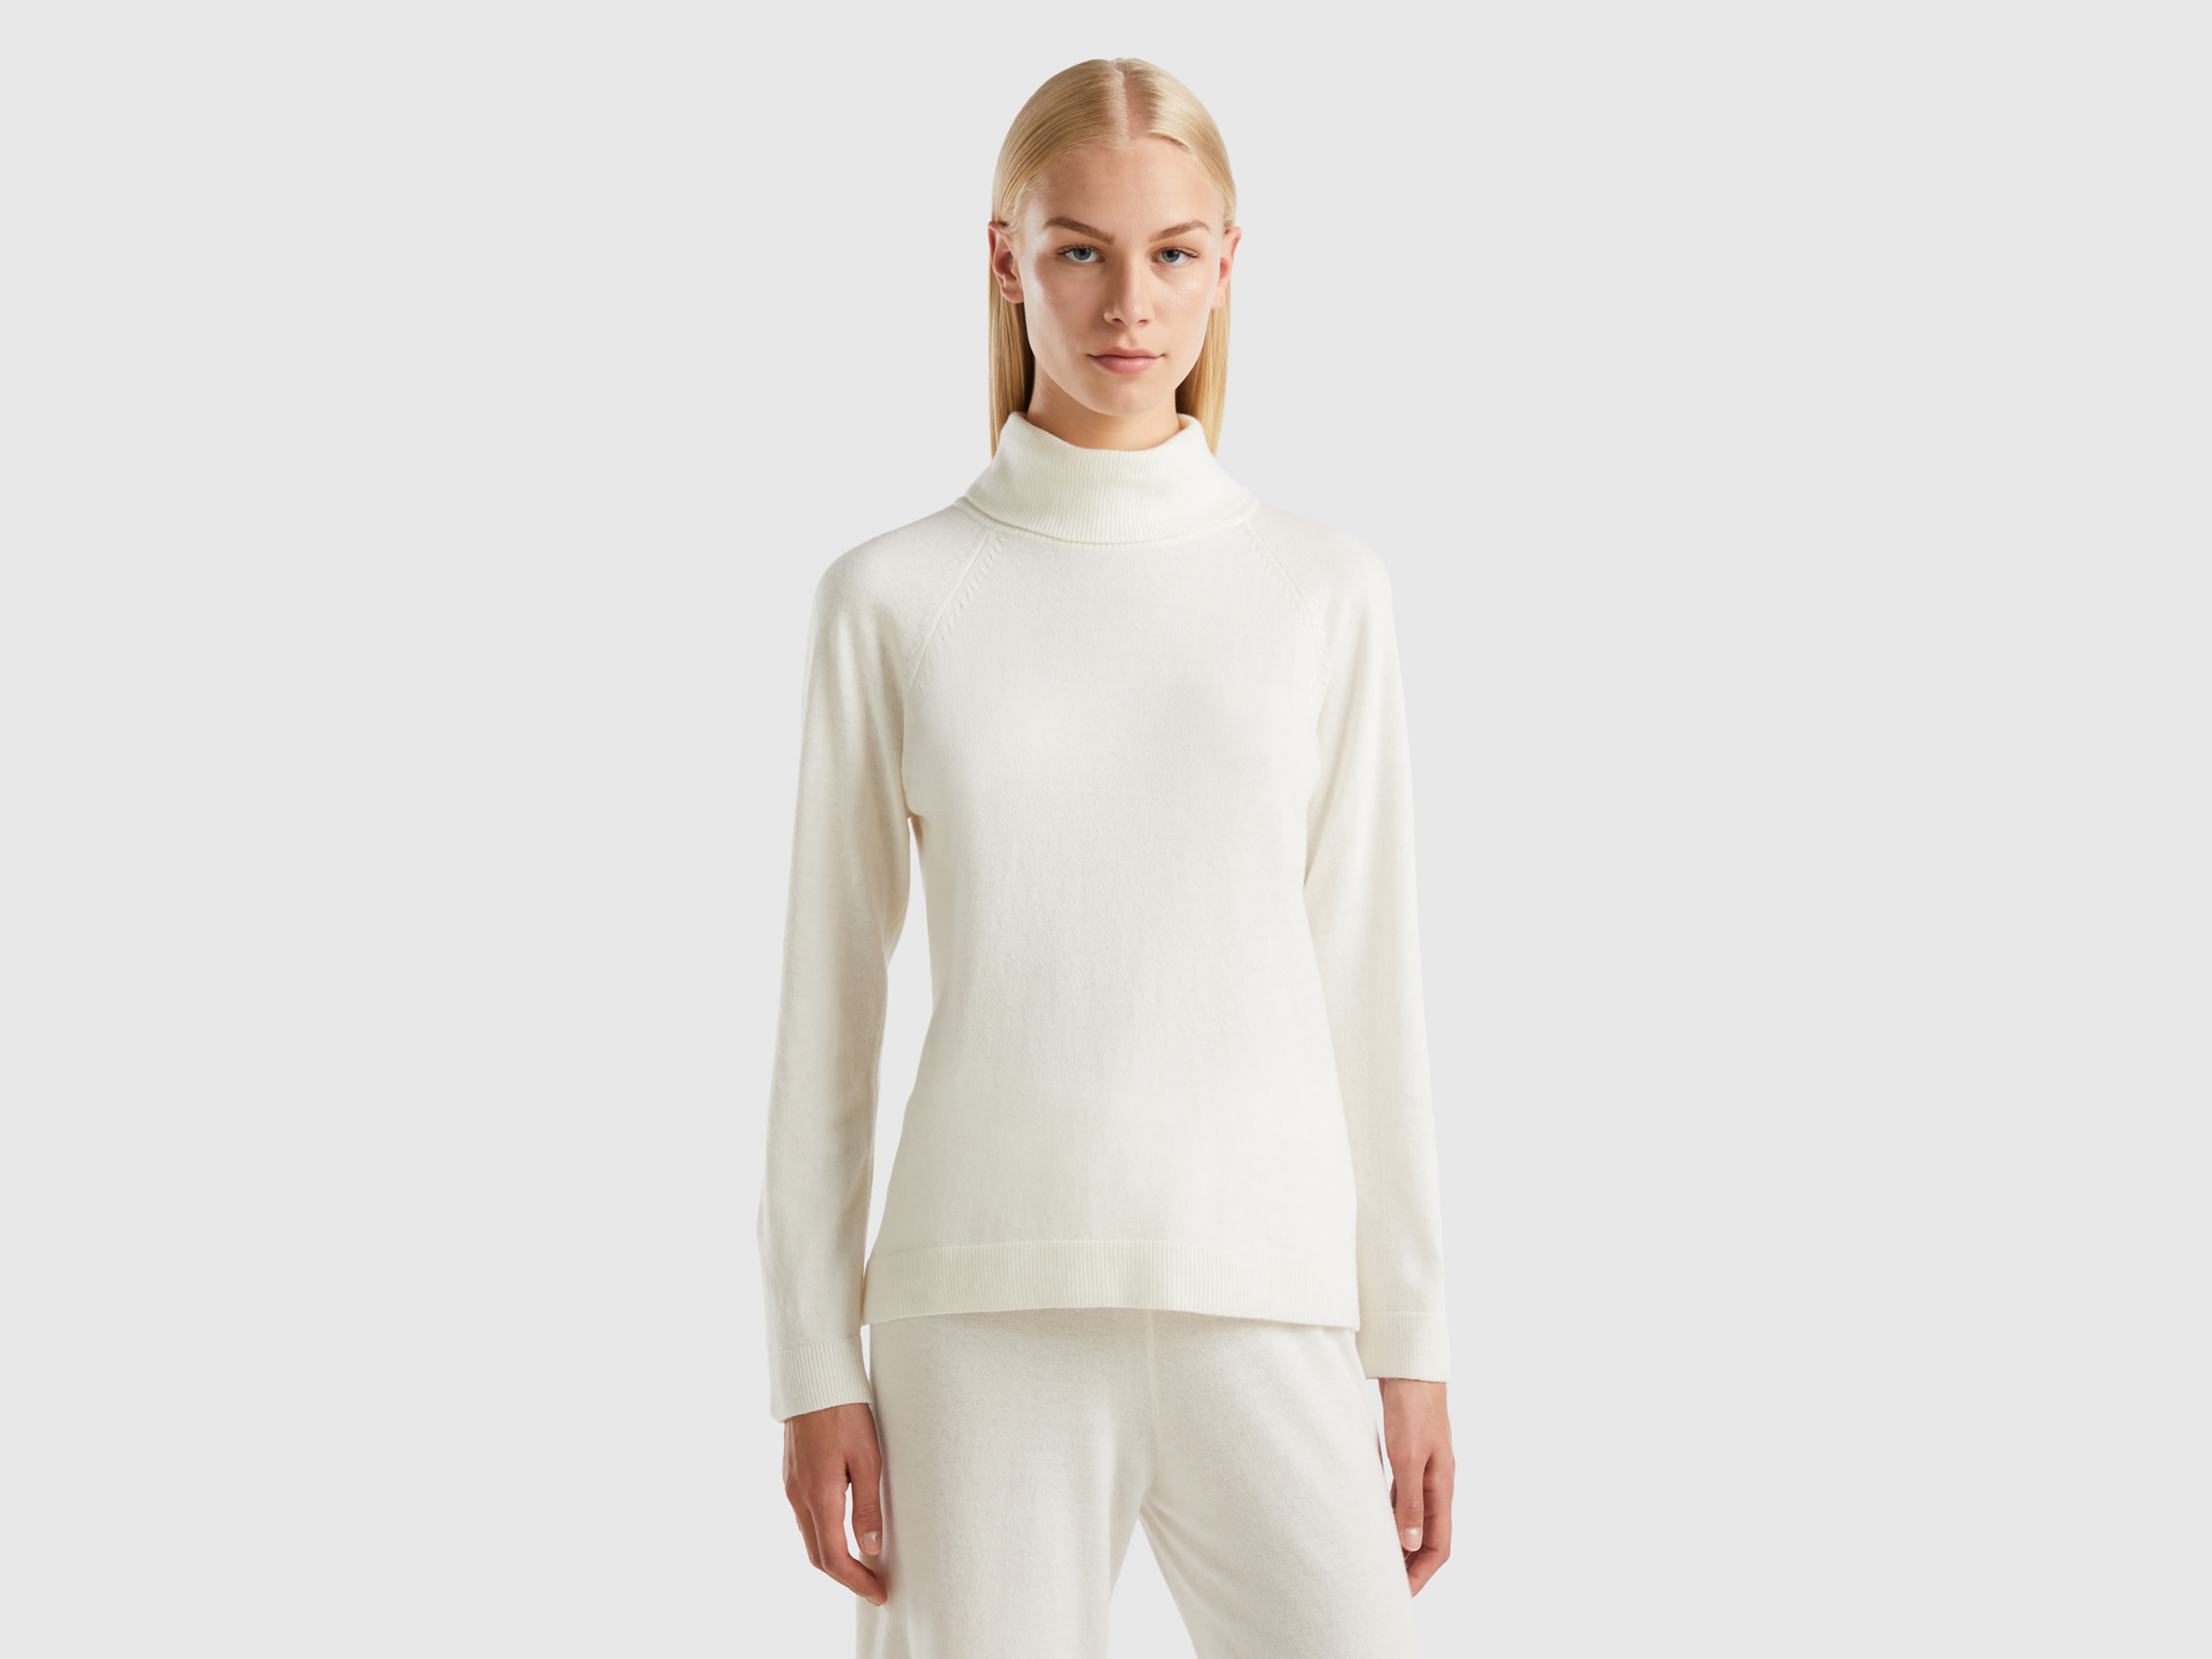 Benetton, White Turtleneck Sweater In Cashmere And Wool Blend, size M, Creamy White, Women